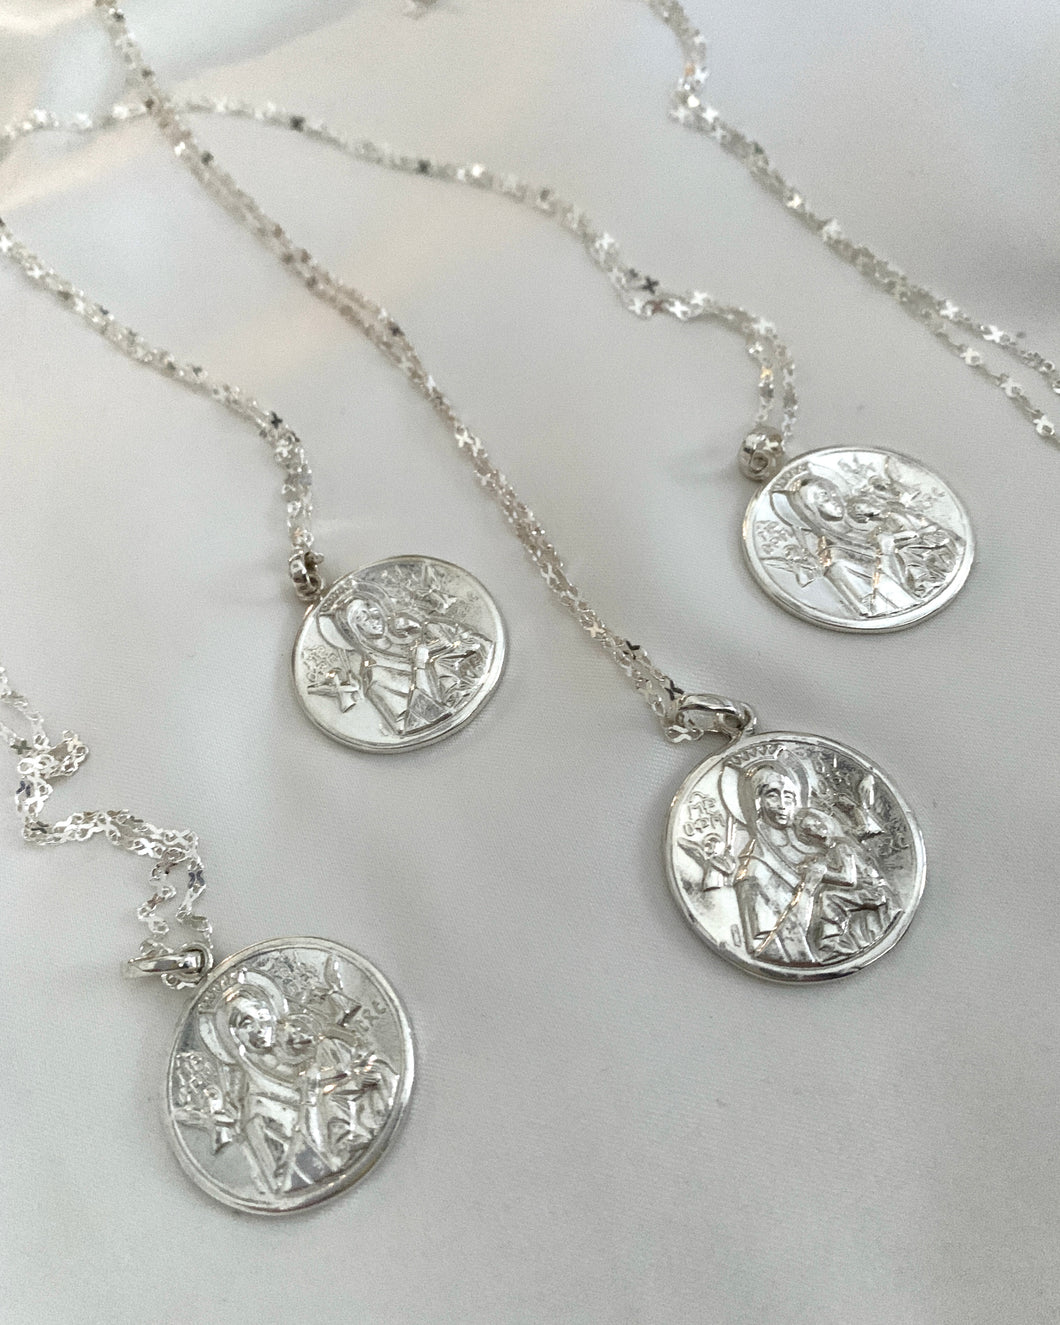 A round white gold pendant with the Our Lady of Perpetual Help. 